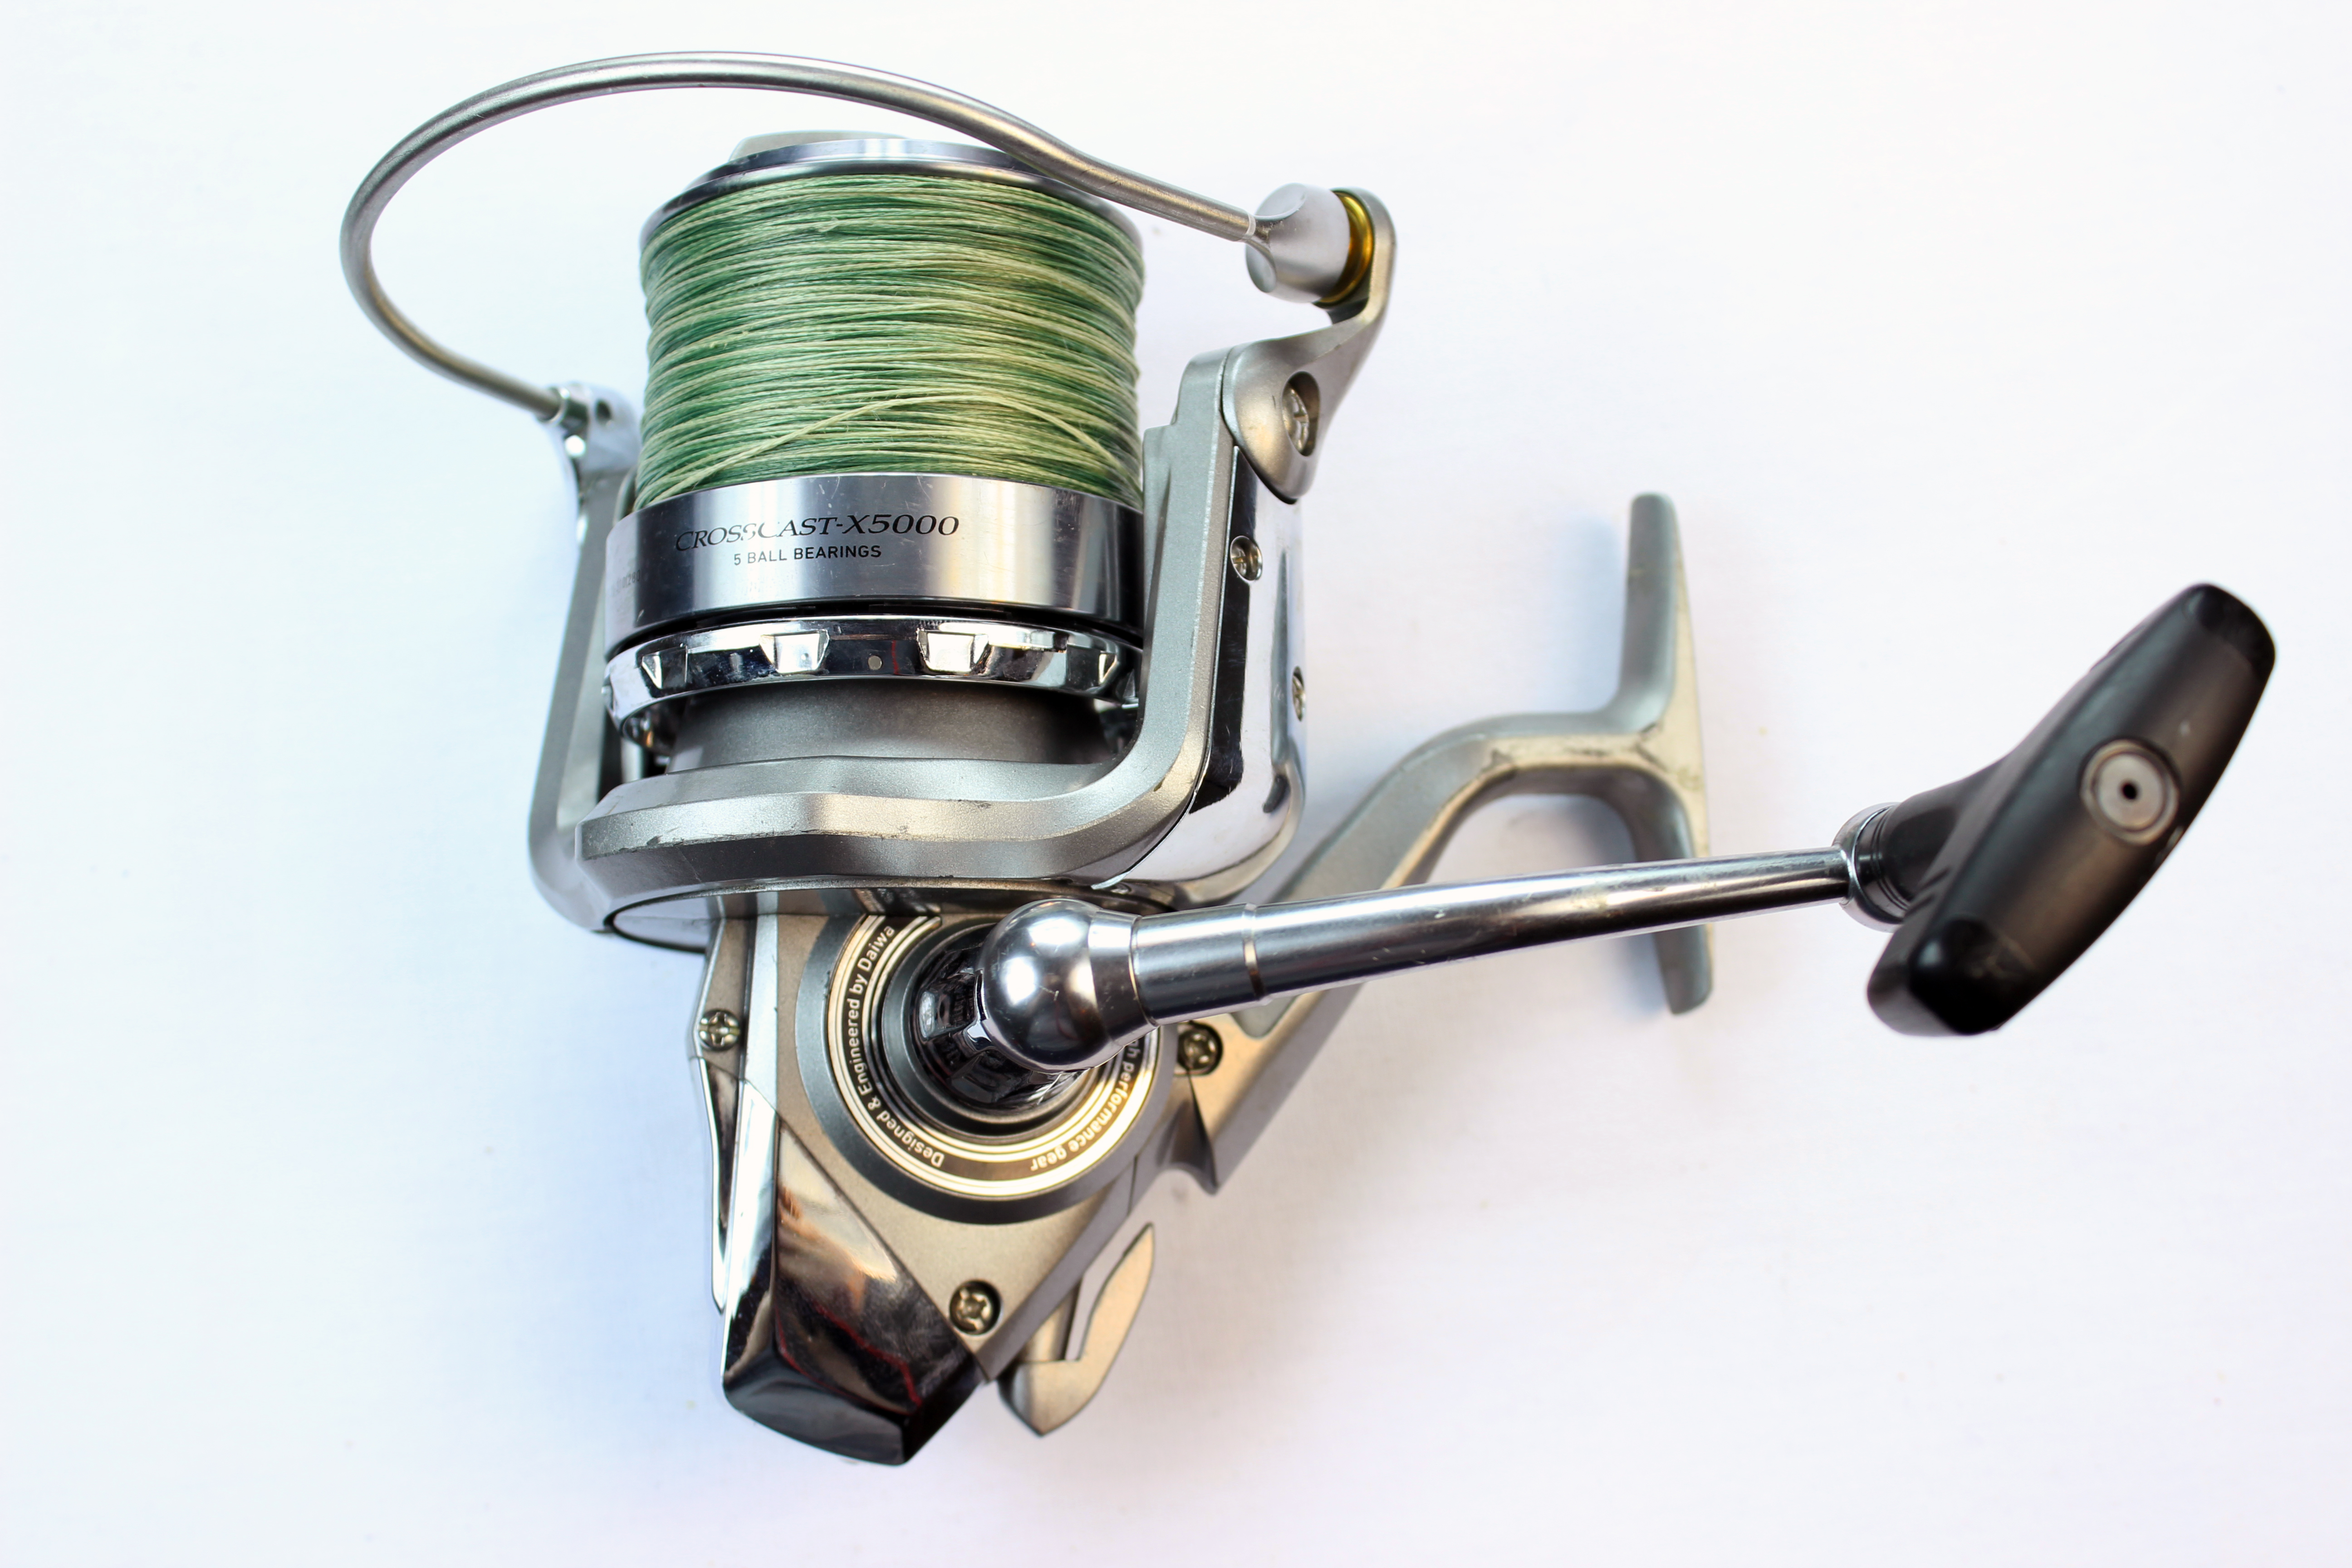 Tune-Up Tuesday: How to Use a Baitfeeder Reel to Catch Catfish